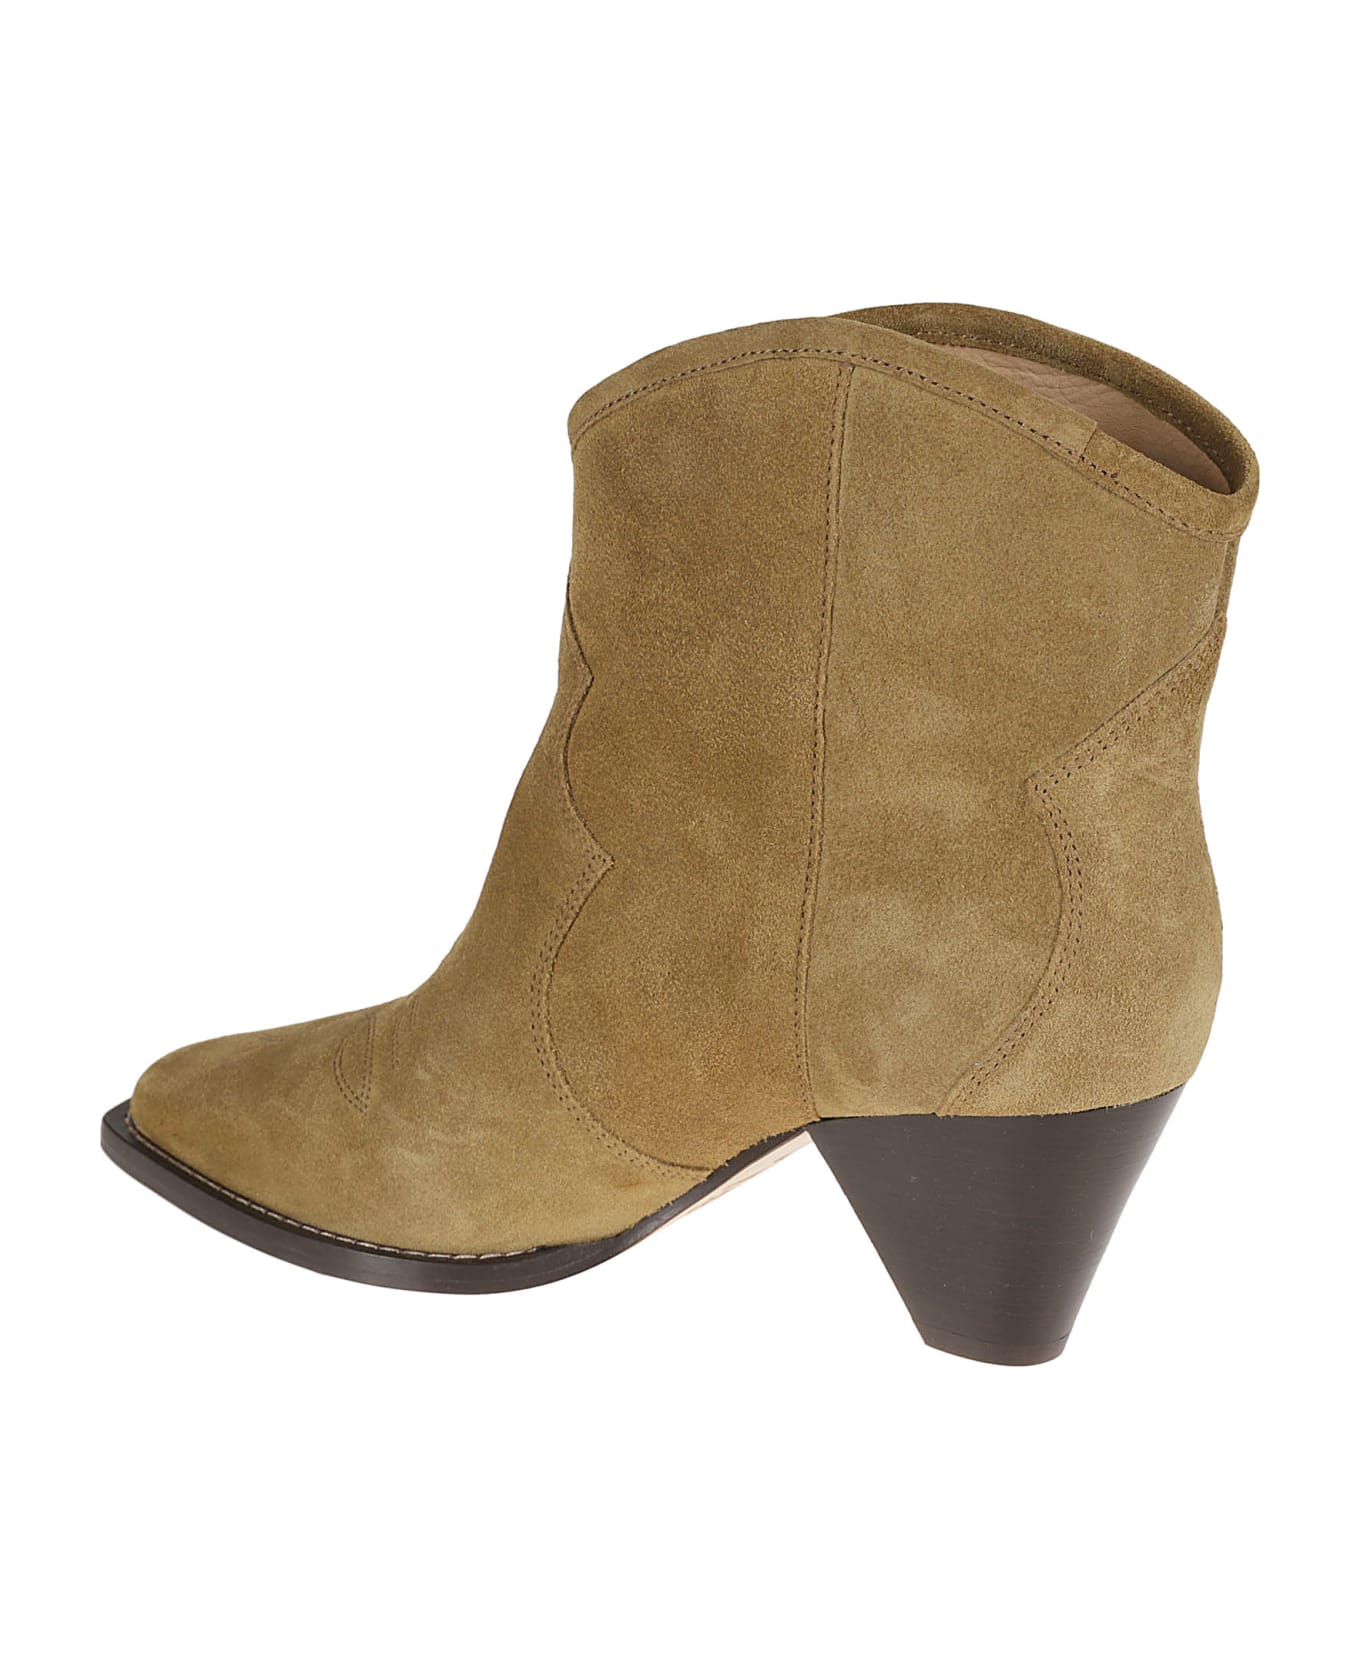 Isabel Marant Darizo Suede Ankle Boots - TAUPE ブーツ